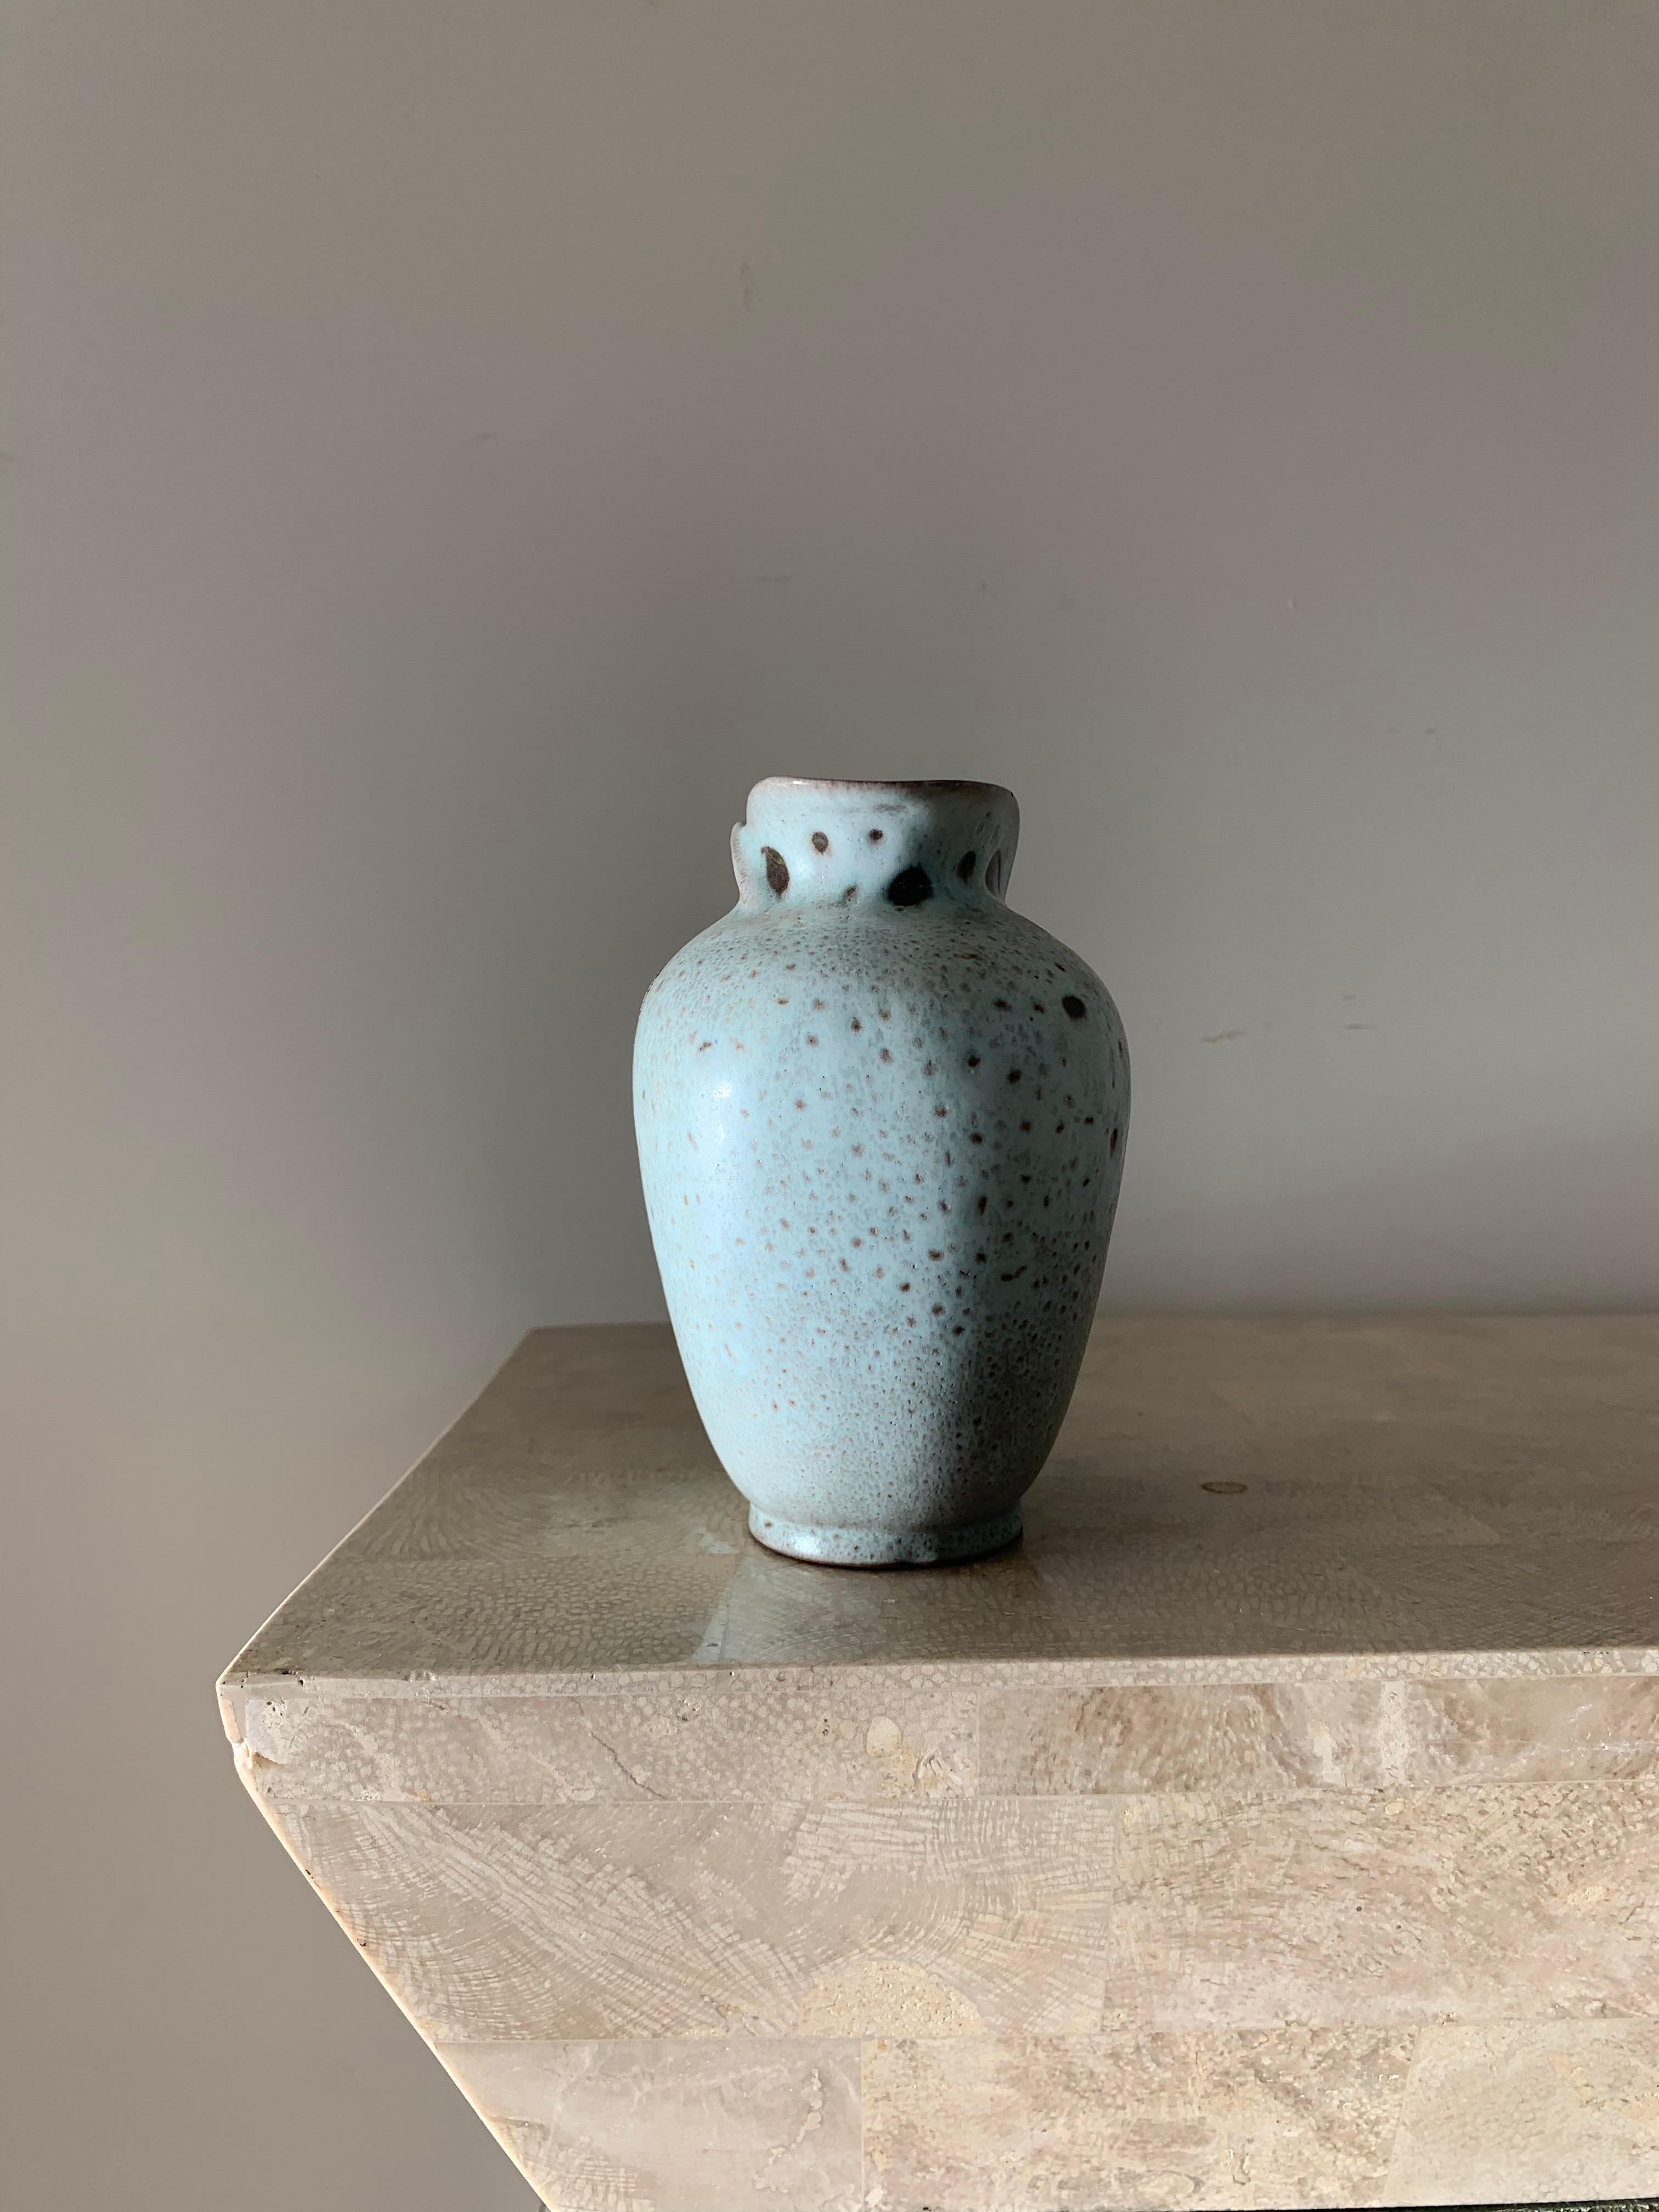 Fired Carstens Tönnieshof Pockmarked Ceramic Vase from West Germany, circa 1950s